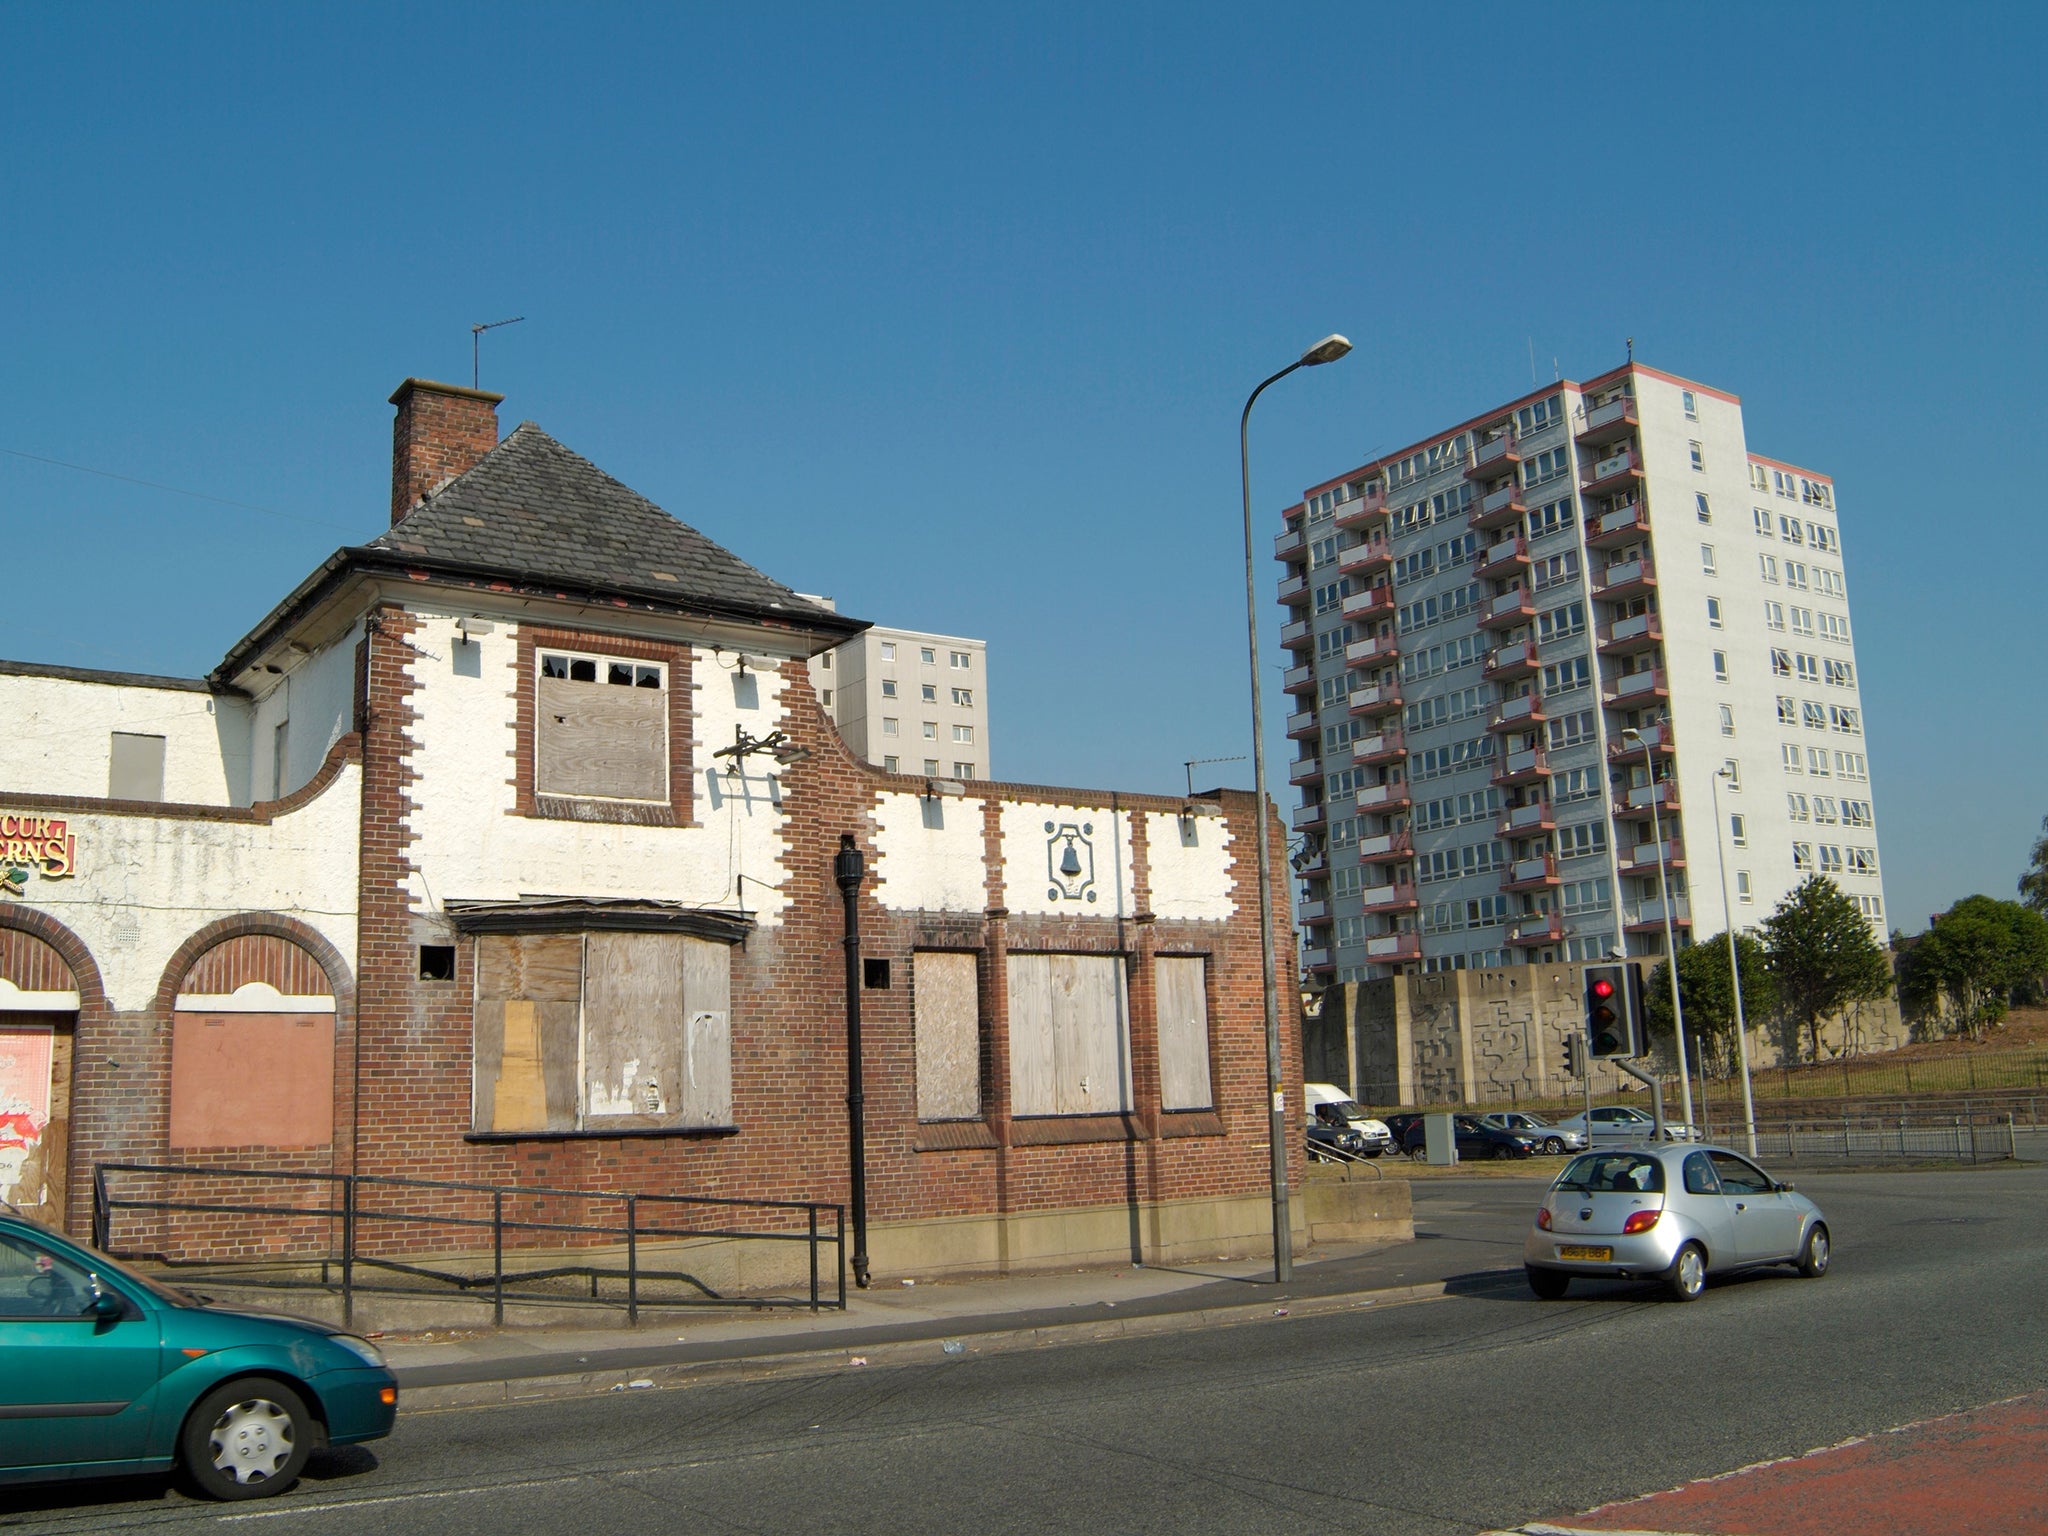 Bleak house: Knowsley Heights and the former Bluebell public house in Huyton,
Merseyside